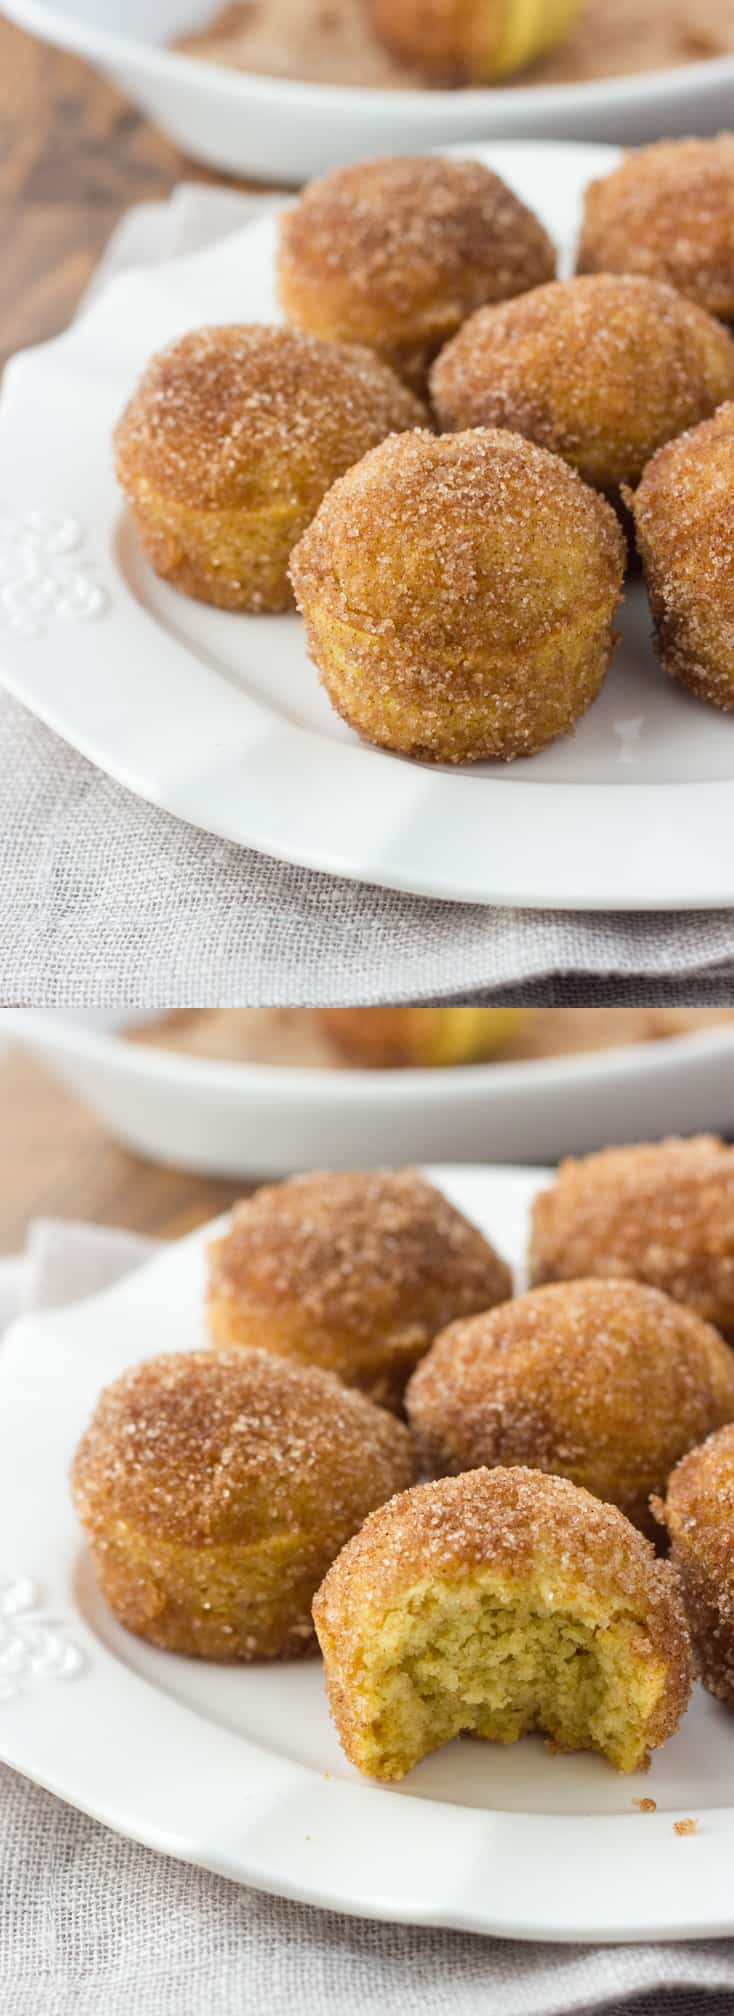 Gluten-Free Cinnamon Sugar Brown Butter Breakfast Puffs! They taste like mini donuts and are so easy to make!